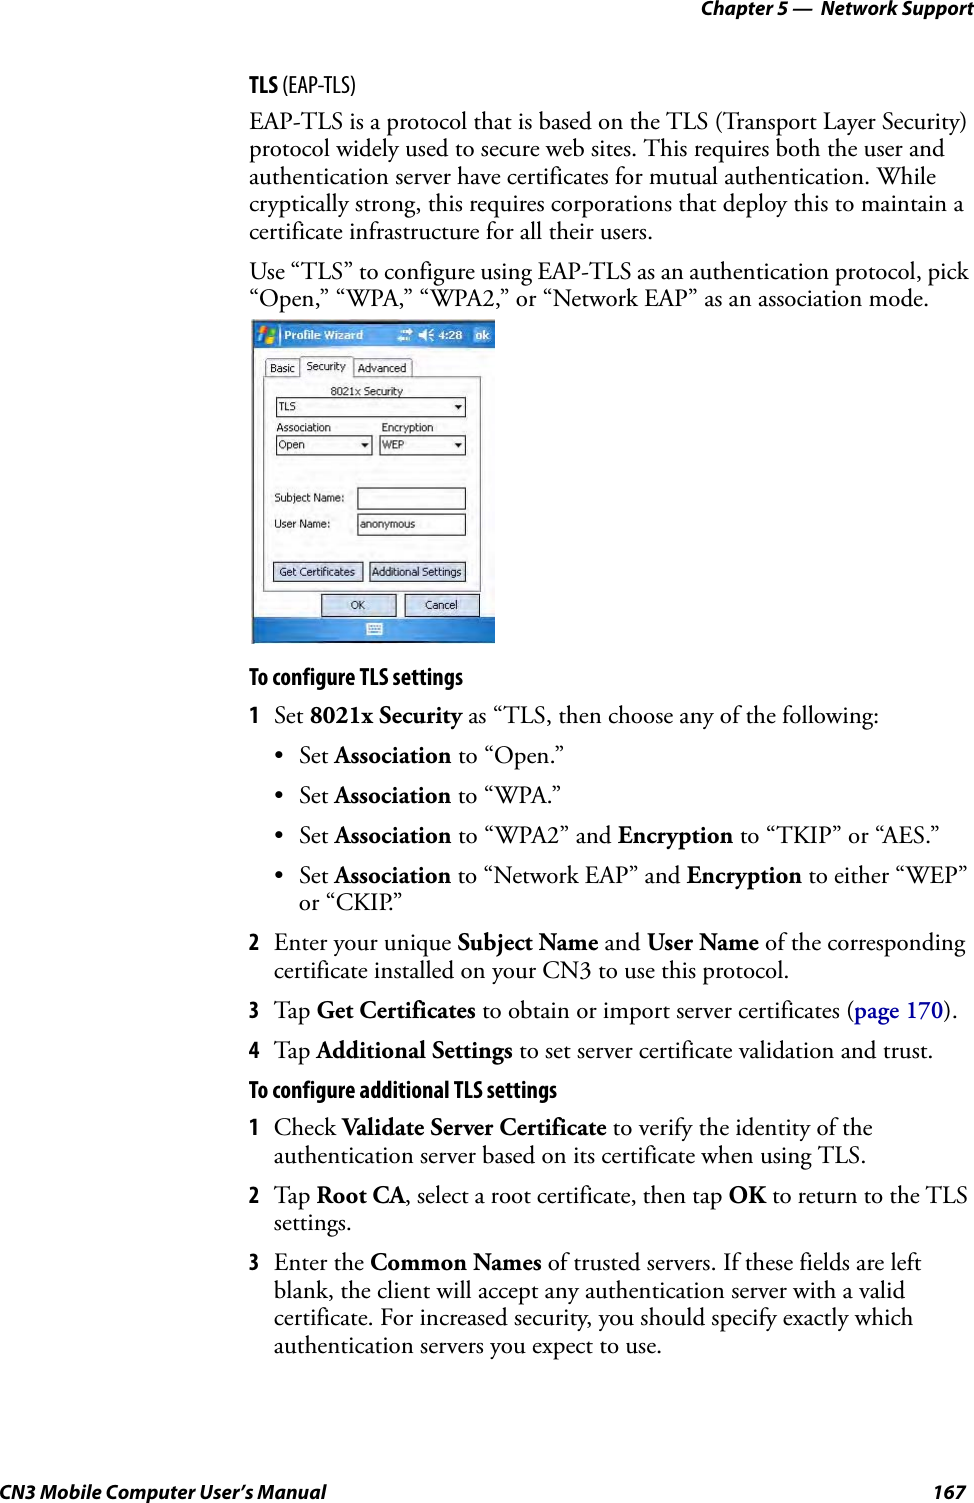 Chapter 5 —  Network SupportCN3 Mobile Computer User’s Manual 167TLS (EAP-TLS)EAP-TLS is a protocol that is based on the TLS (Transport Layer Security) protocol widely used to secure web sites. This requires both the user and authentication server have certificates for mutual authentication. While cryptically strong, this requires corporations that deploy this to maintain a certificate infrastructure for all their users.Use “TLS” to configure using EAP-TLS as an authentication protocol, pick “Open,” “WPA,” “WPA2,” or “Network EAP” as an association mode.To configure TLS settings1Set 8021x Security as “TLS, then choose any of the following:•Set Association to “Open.”•Set Association to “WPA.”•Set Association to “WPA2” and Encryption to “TKIP” or “AES.”•Set Association to “Network EAP” and Encryption to either “WEP” or “CKIP.”2Enter your unique Subject Name and User Name of the corresponding certificate installed on your CN3 to use this protocol.3Tap Get Certificates to obtain or import server certificates (page 170).4Tap Additional Settings to set server certificate validation and trust.To configure additional TLS settings1Check Validate Server Certificate to verify the identity of the authentication server based on its certificate when using TLS.2Tap Root CA, select a root certificate, then tap OK to return to the TLS settings.3Enter the Common Names of trusted servers. If these fields are left blank, the client will accept any authentication server with a valid certificate. For increased security, you should specify exactly which authentication servers you expect to use.